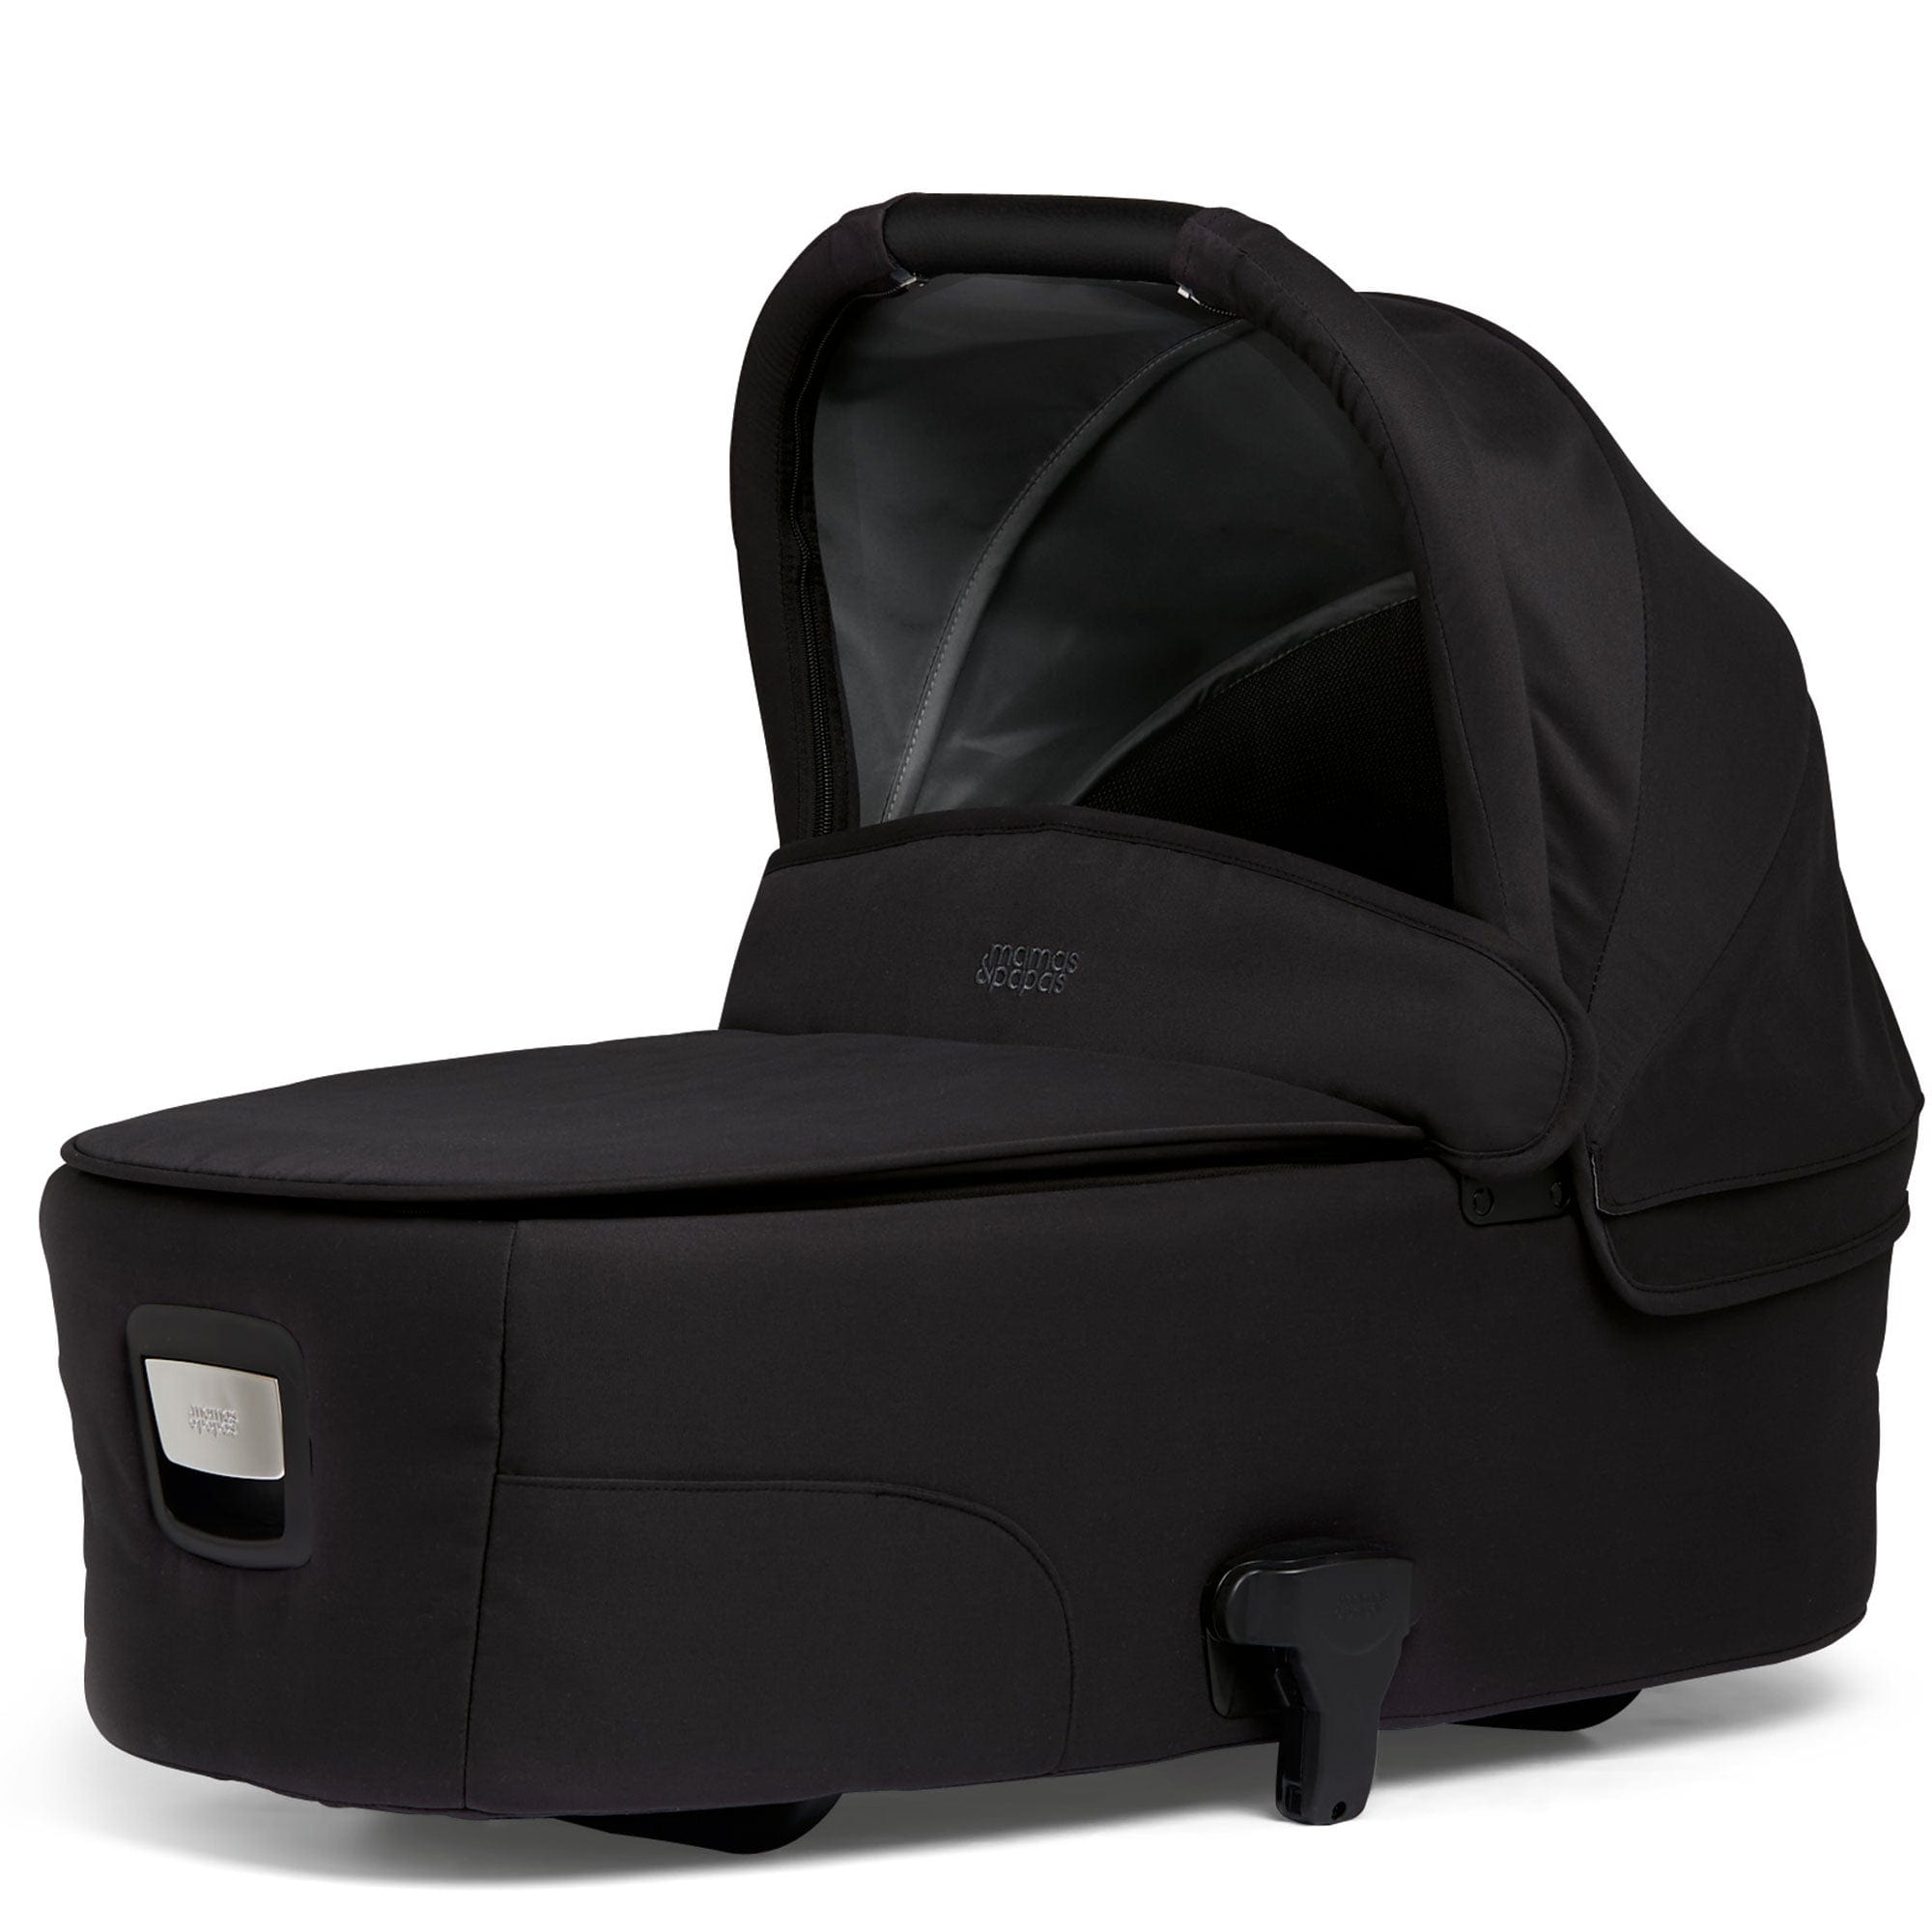 Mamas & Papas Flip XT³ 8 Piece Essentials Bundle with Car Seat in Slated Navy Travel Systems